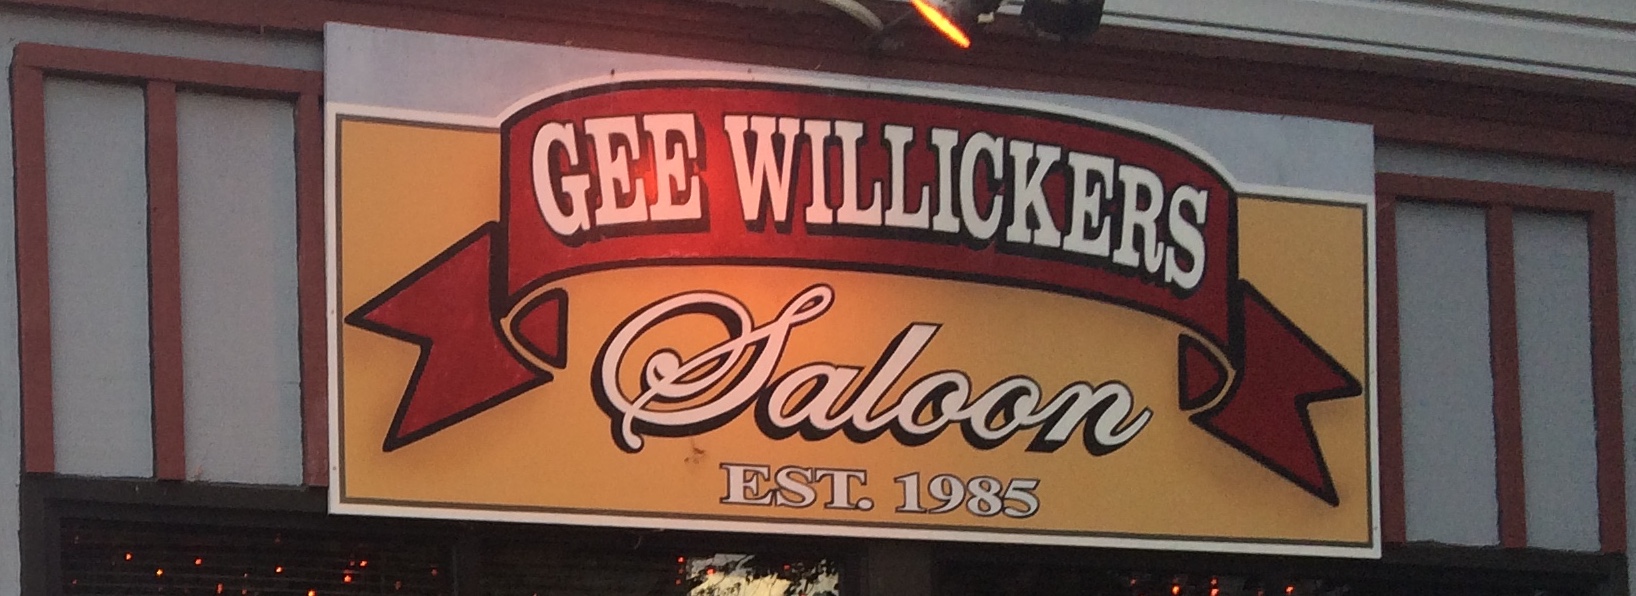 Picture of a sign reading Gee Willickers Saloon Est. 1985